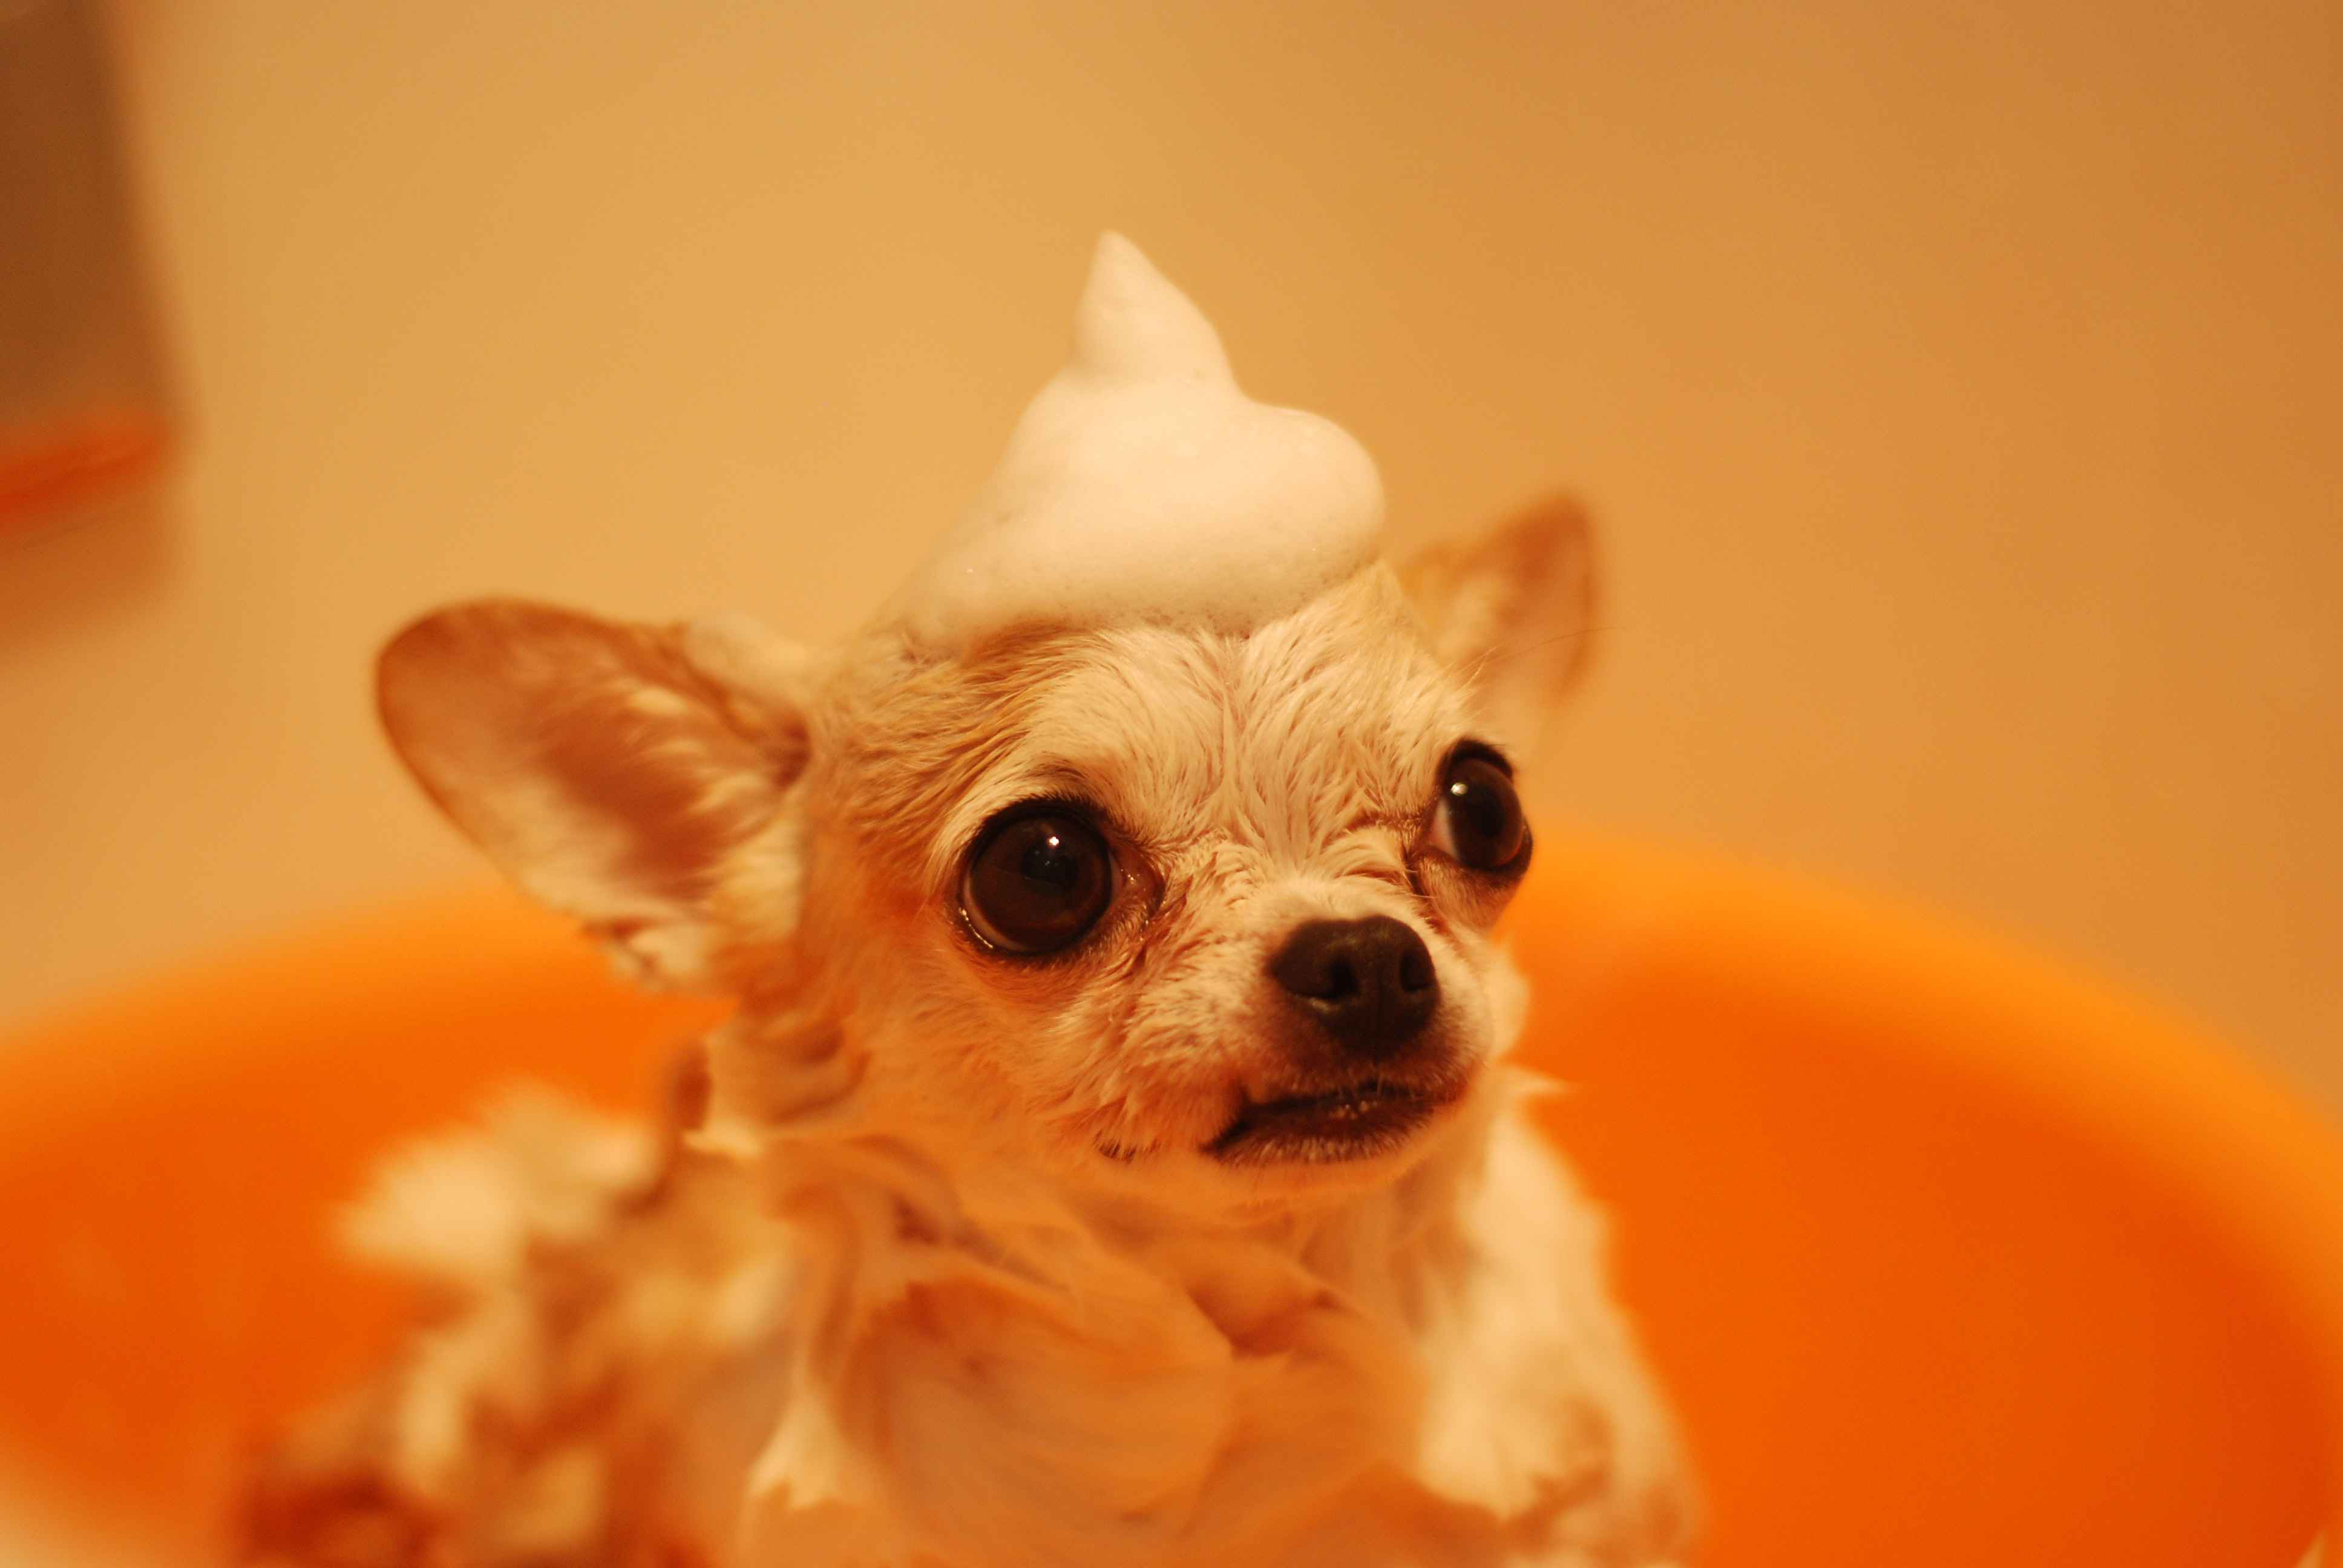 Can anger issues in Chihuahuas be managed through positive reinforcement?